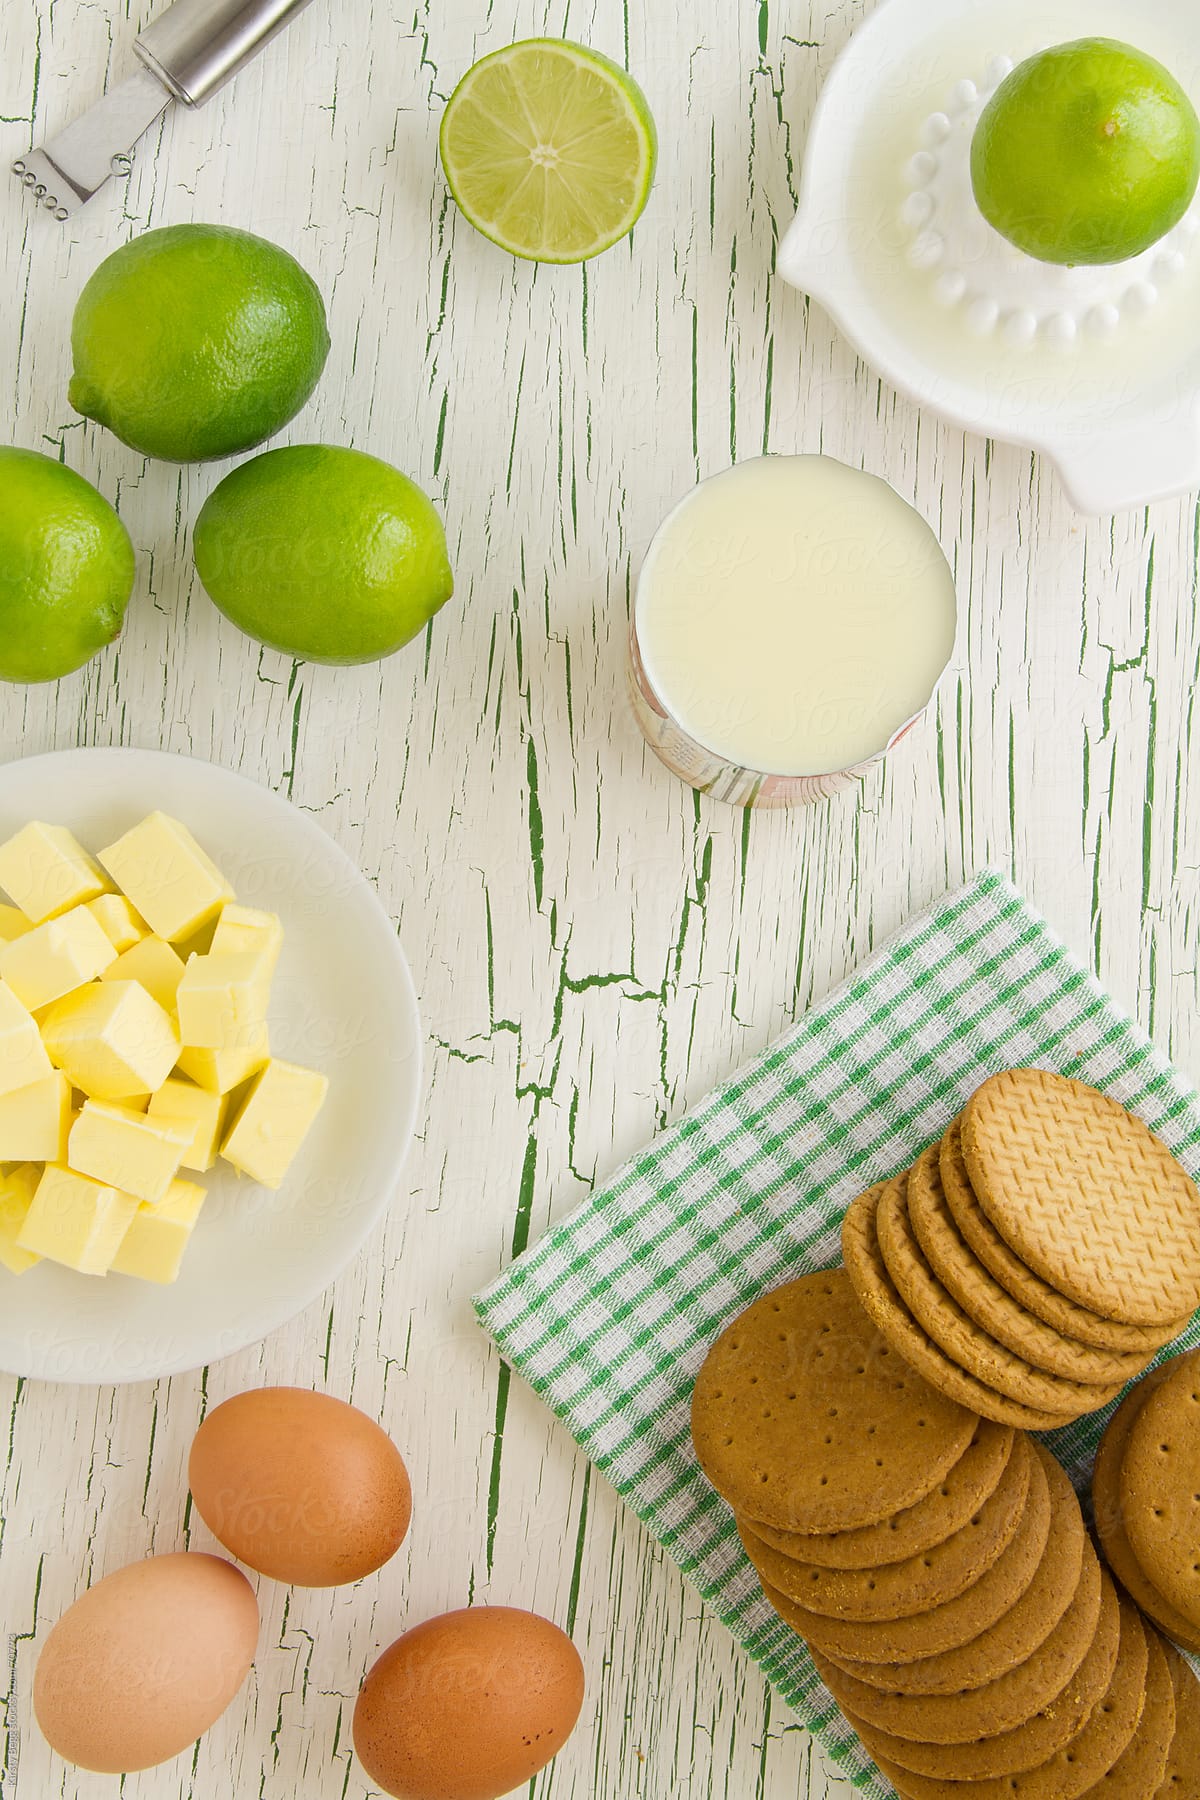 Key Lime Pie Ingredients laid out, viewed from above